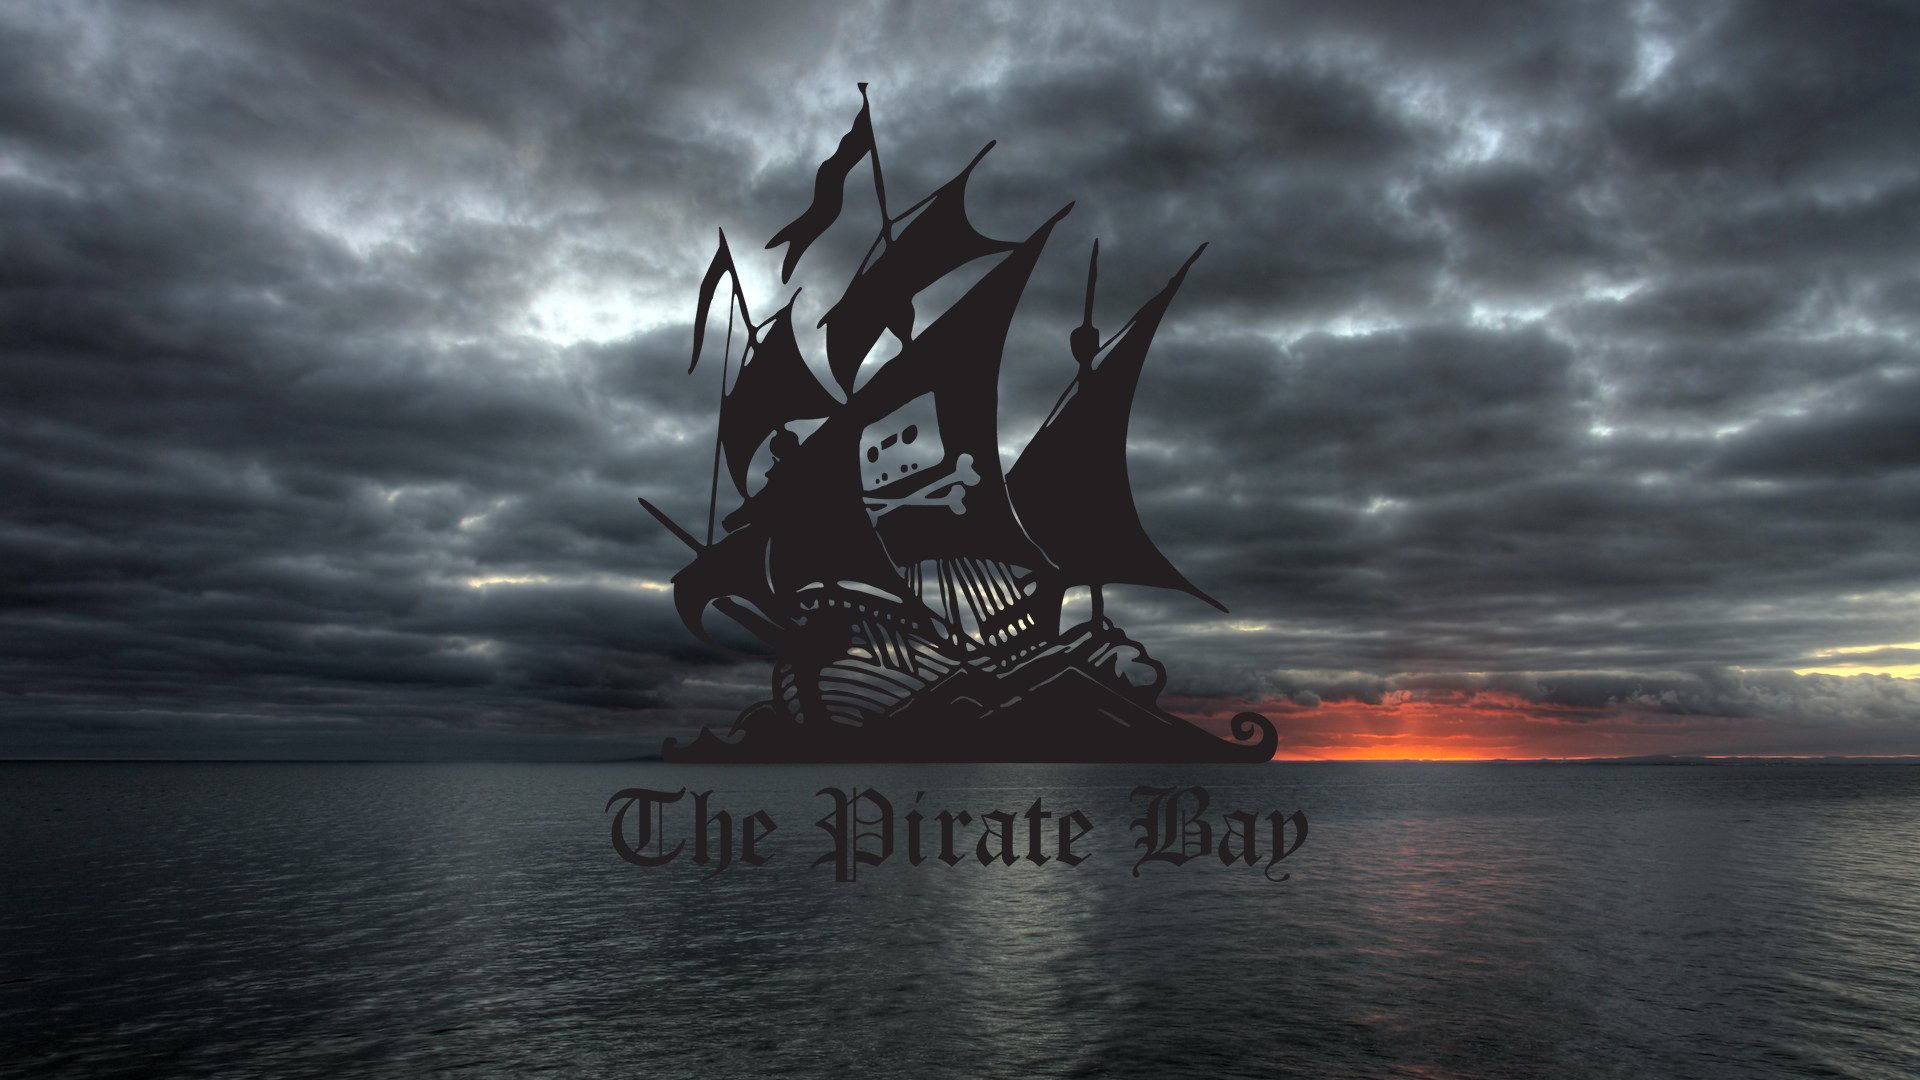 3 The Pirate Bay HD Wallpapers | Background Images - Wallpaper Abyss